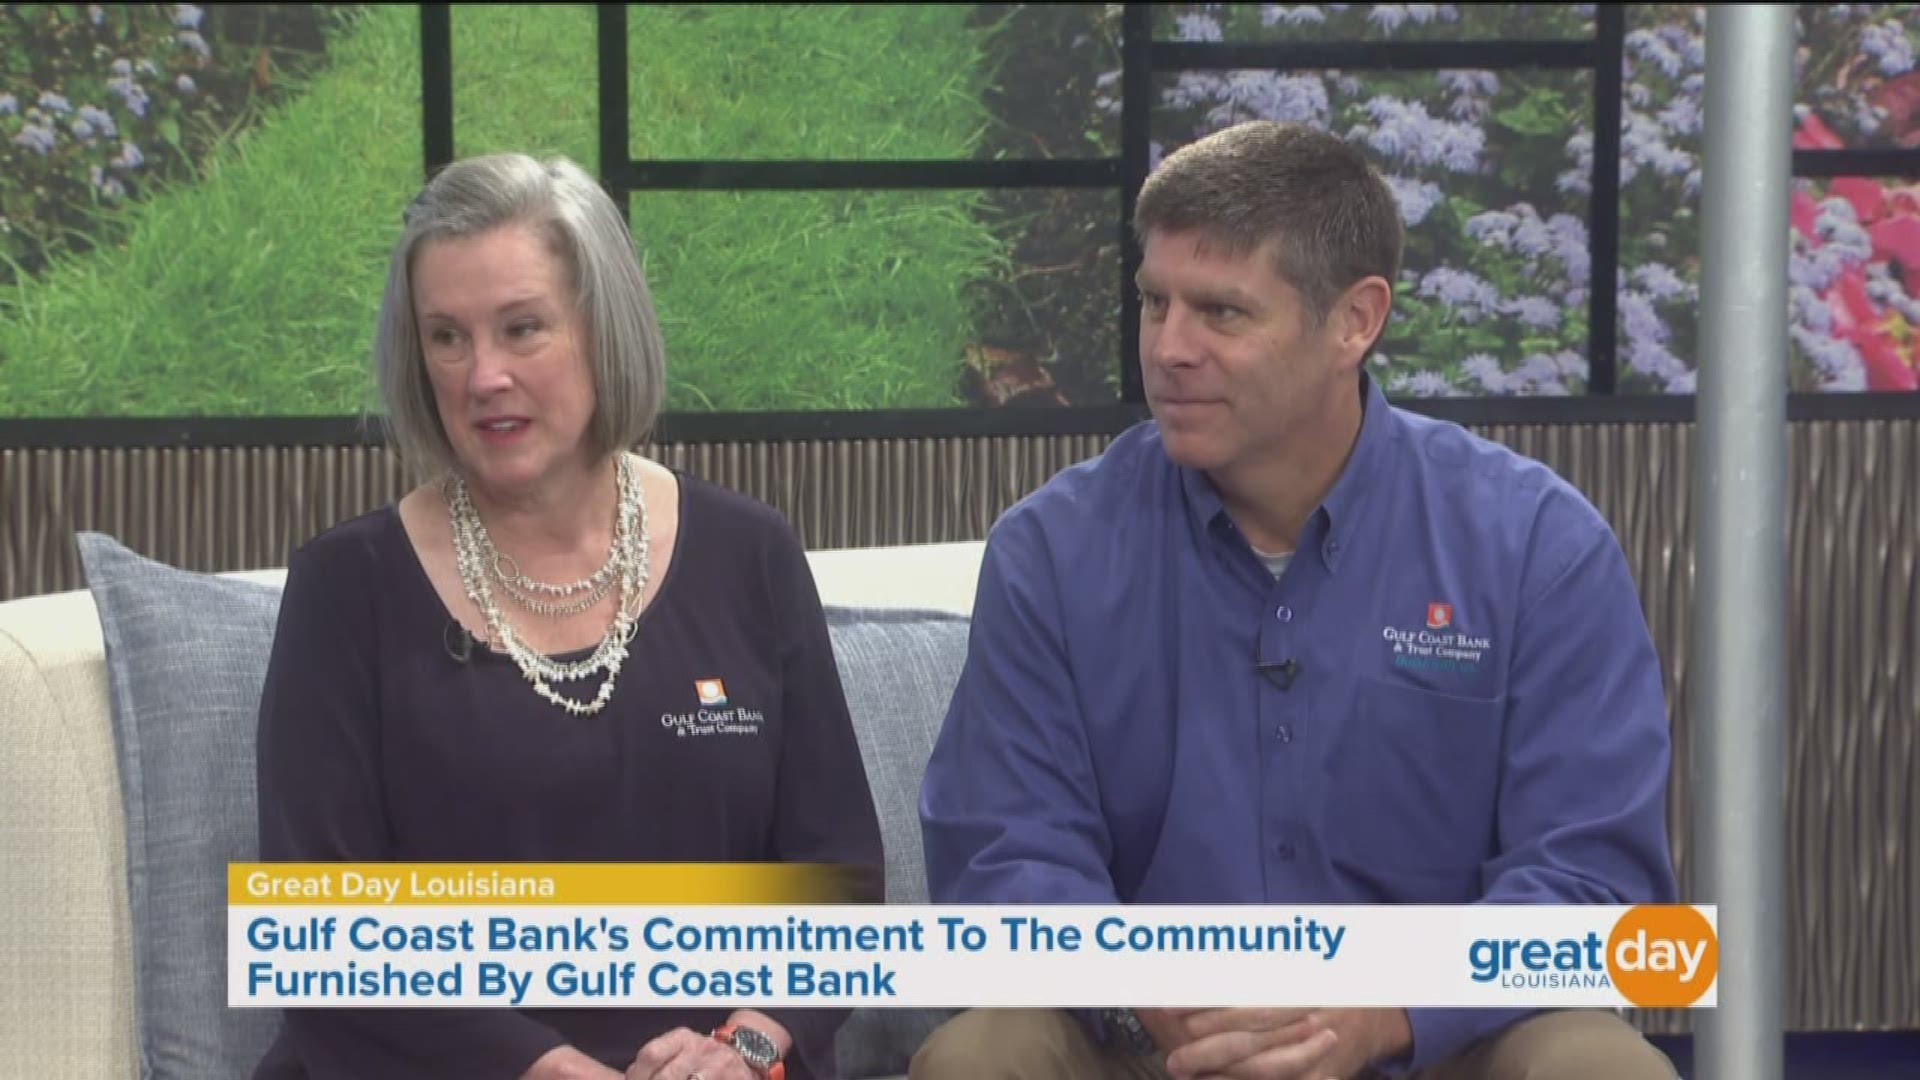 Learn about the Magazine Street location as well as Gulf Coast Bank's commitment to the community.